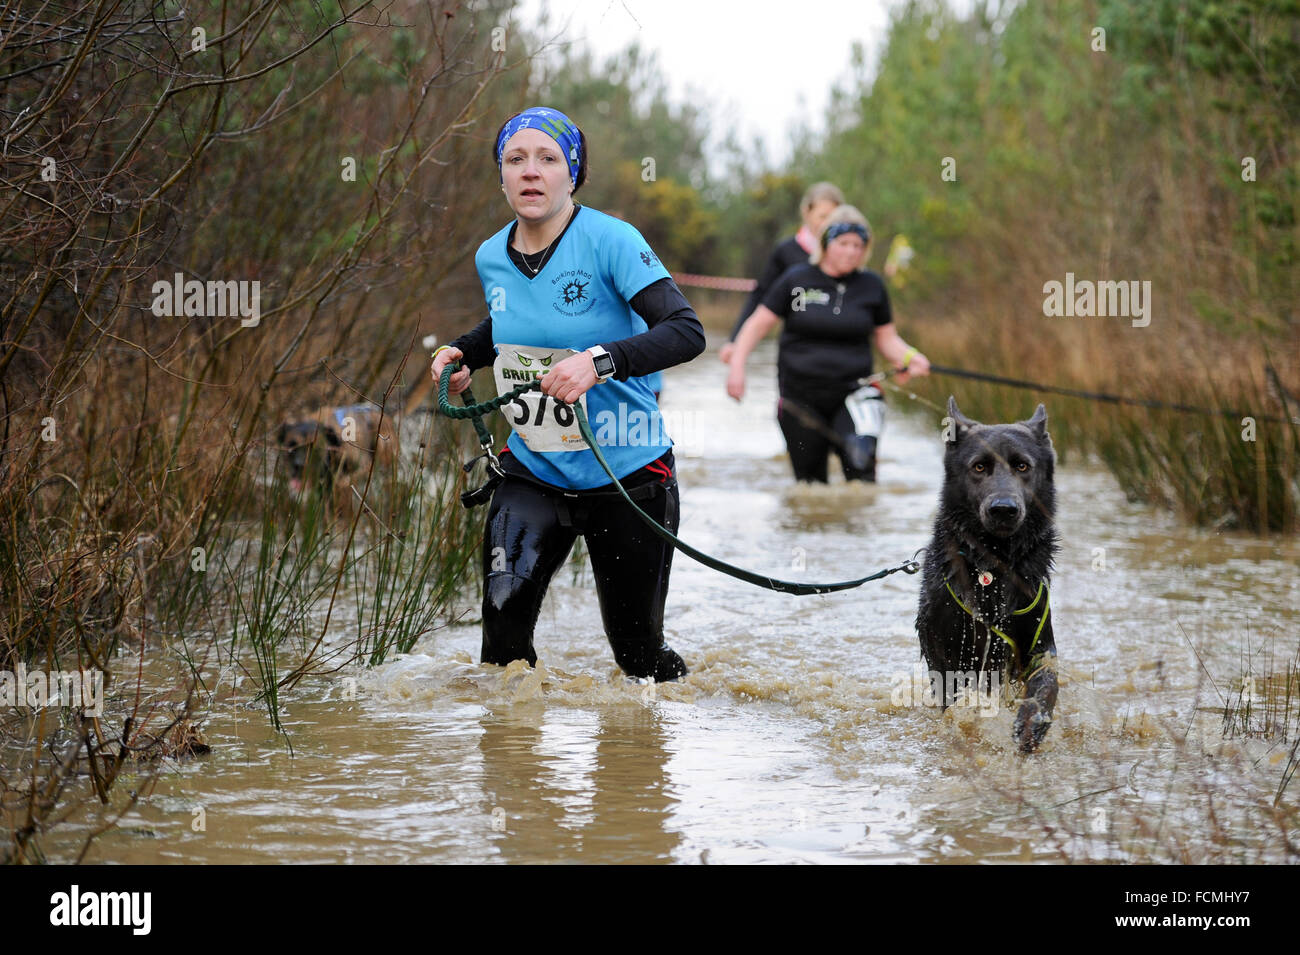 Aldershot, Hants, UK. 23rd January, 2016. Karen Connolly and her dog Ash  struggle through the flooded streams of the Brutal women only  10km canicross race at Long valley Aldershot Hampshire having to break the ice as the make there way around the course .  The recent weather made the Brutal 10km off road course live up to its name as the puddles and streams where up to waste height in many places with early runners having to break the ice as they entered the water.  Credit:  PBWPIX/Alamy Live News Stock Photo